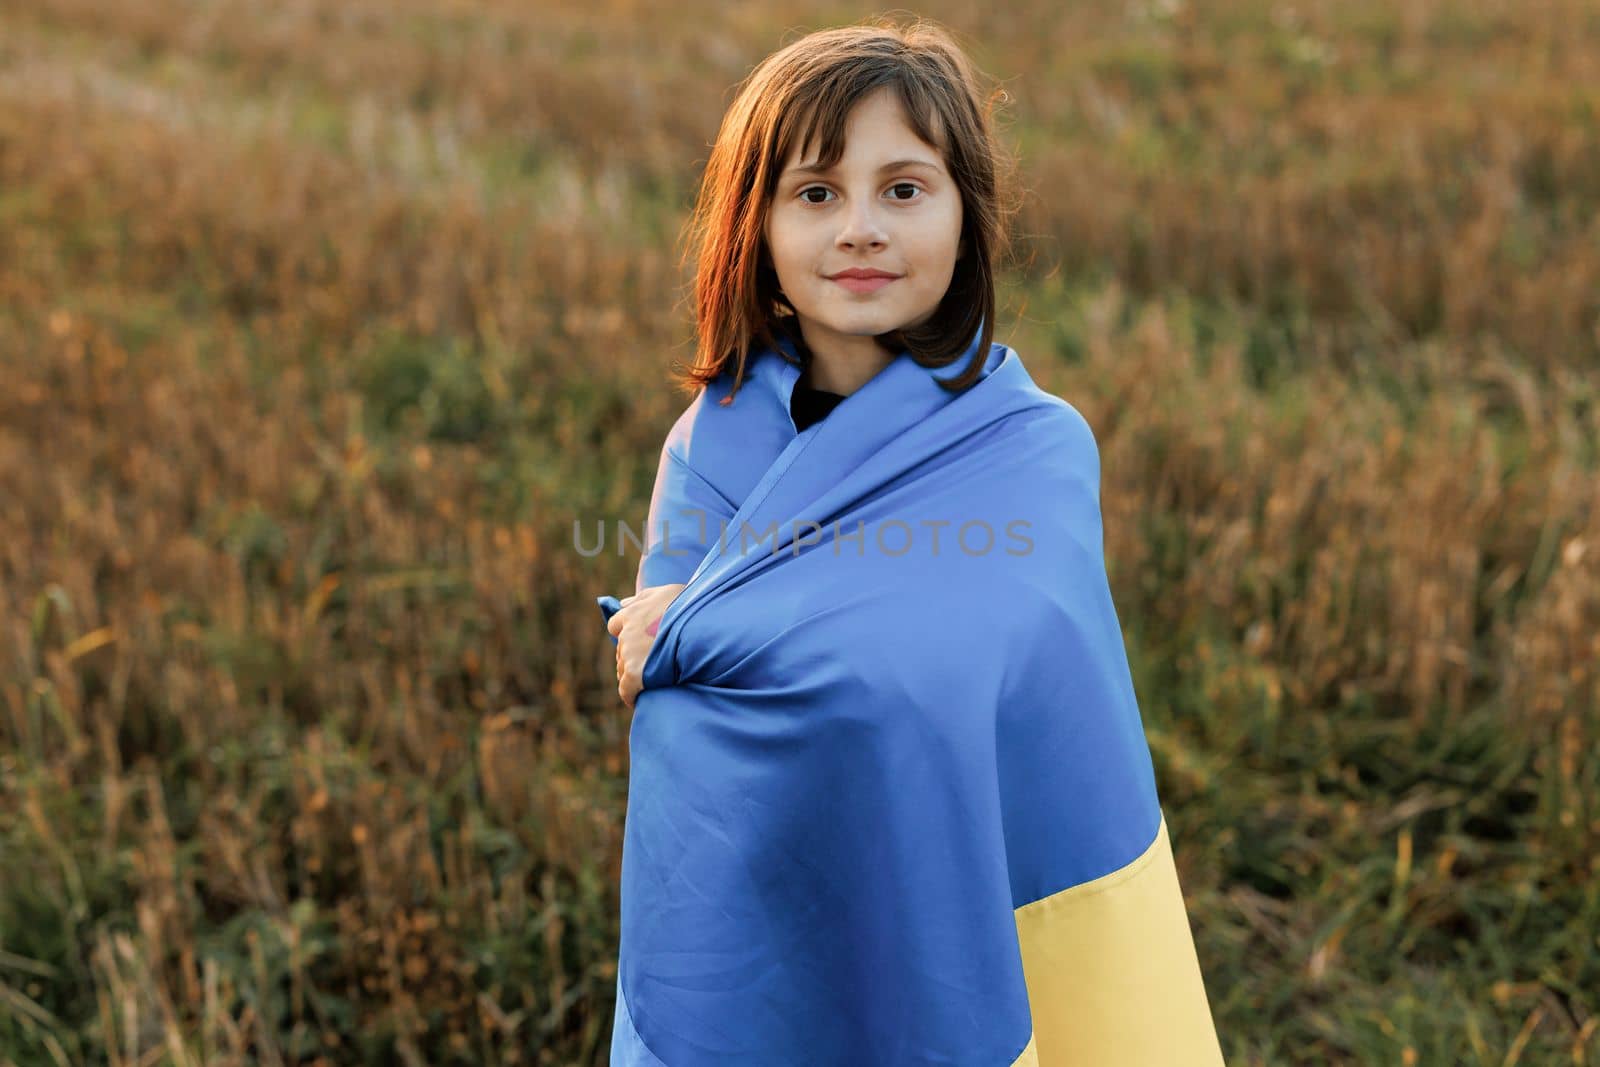 Portrait of Child with Ukrainian flag in field. Little girl waving national flag praying for peace. Happy kid celebrating Independence Day. Pray for Ukraine.